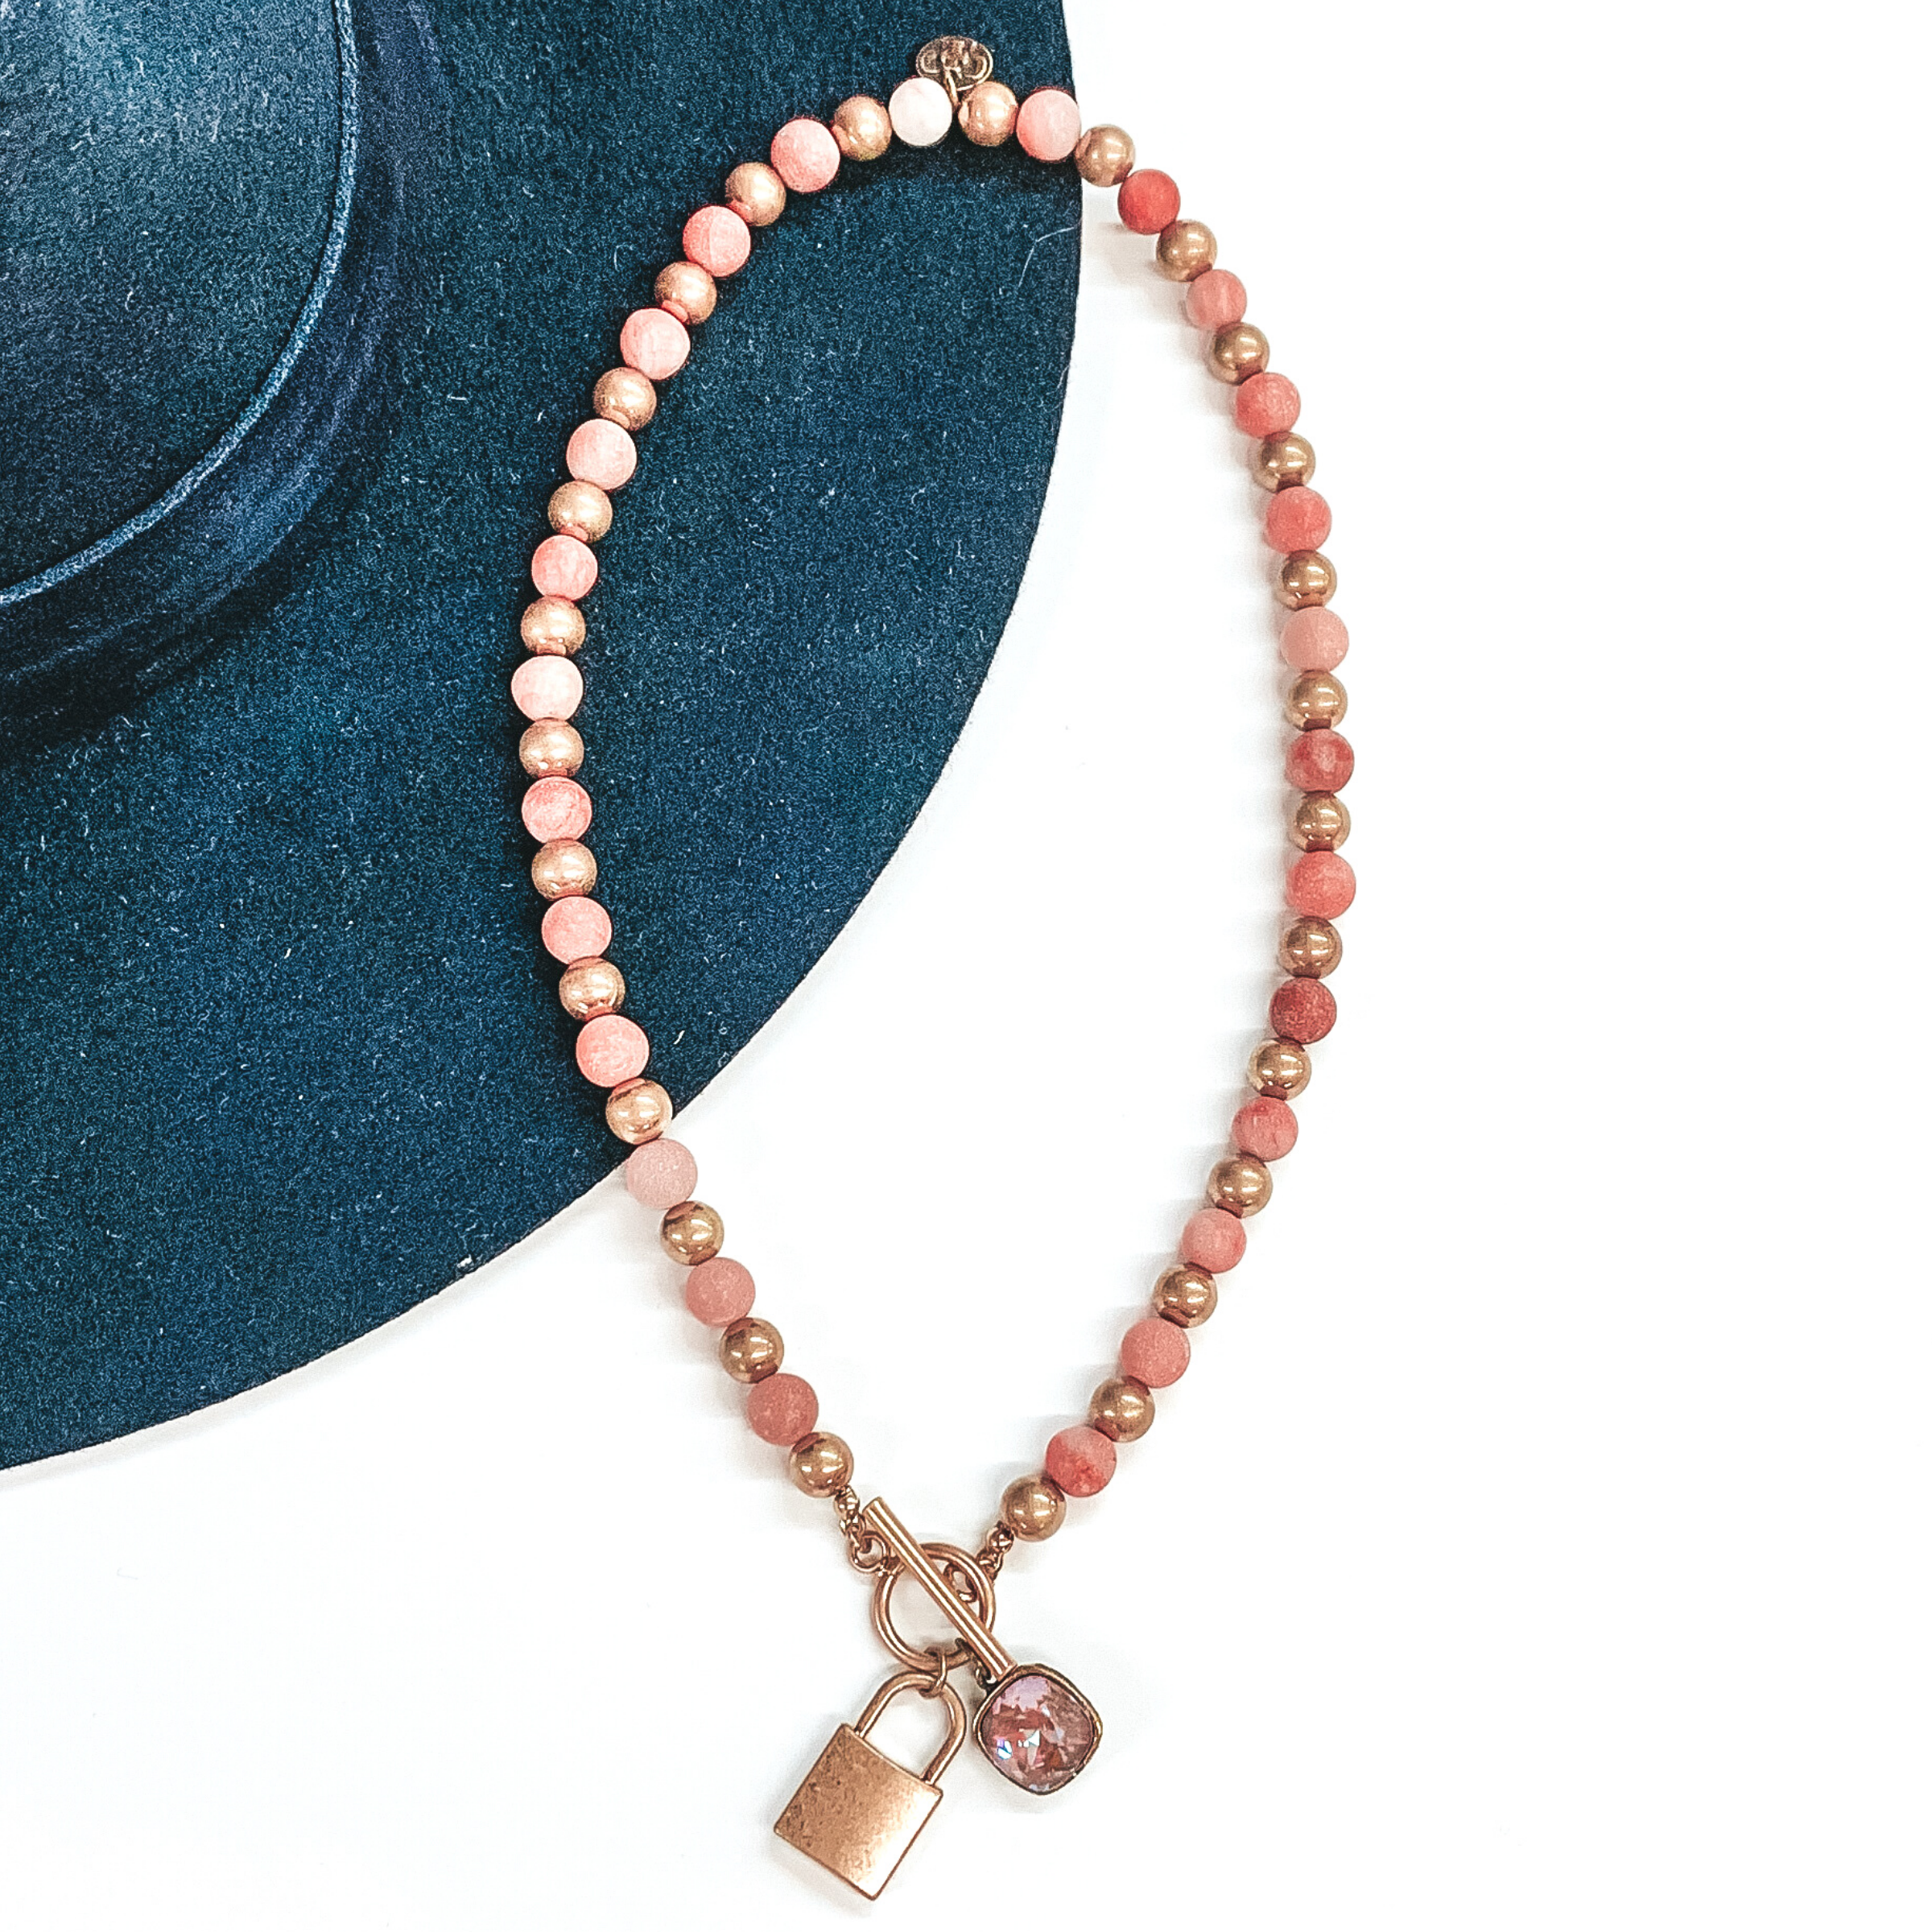 Bronze and pink colored beaded necklace with front toggle clasp. There is also a gold lock pendant and a hanging cappuccino delight cushion cut crystal. This necklace is pictured on a white and navy background.